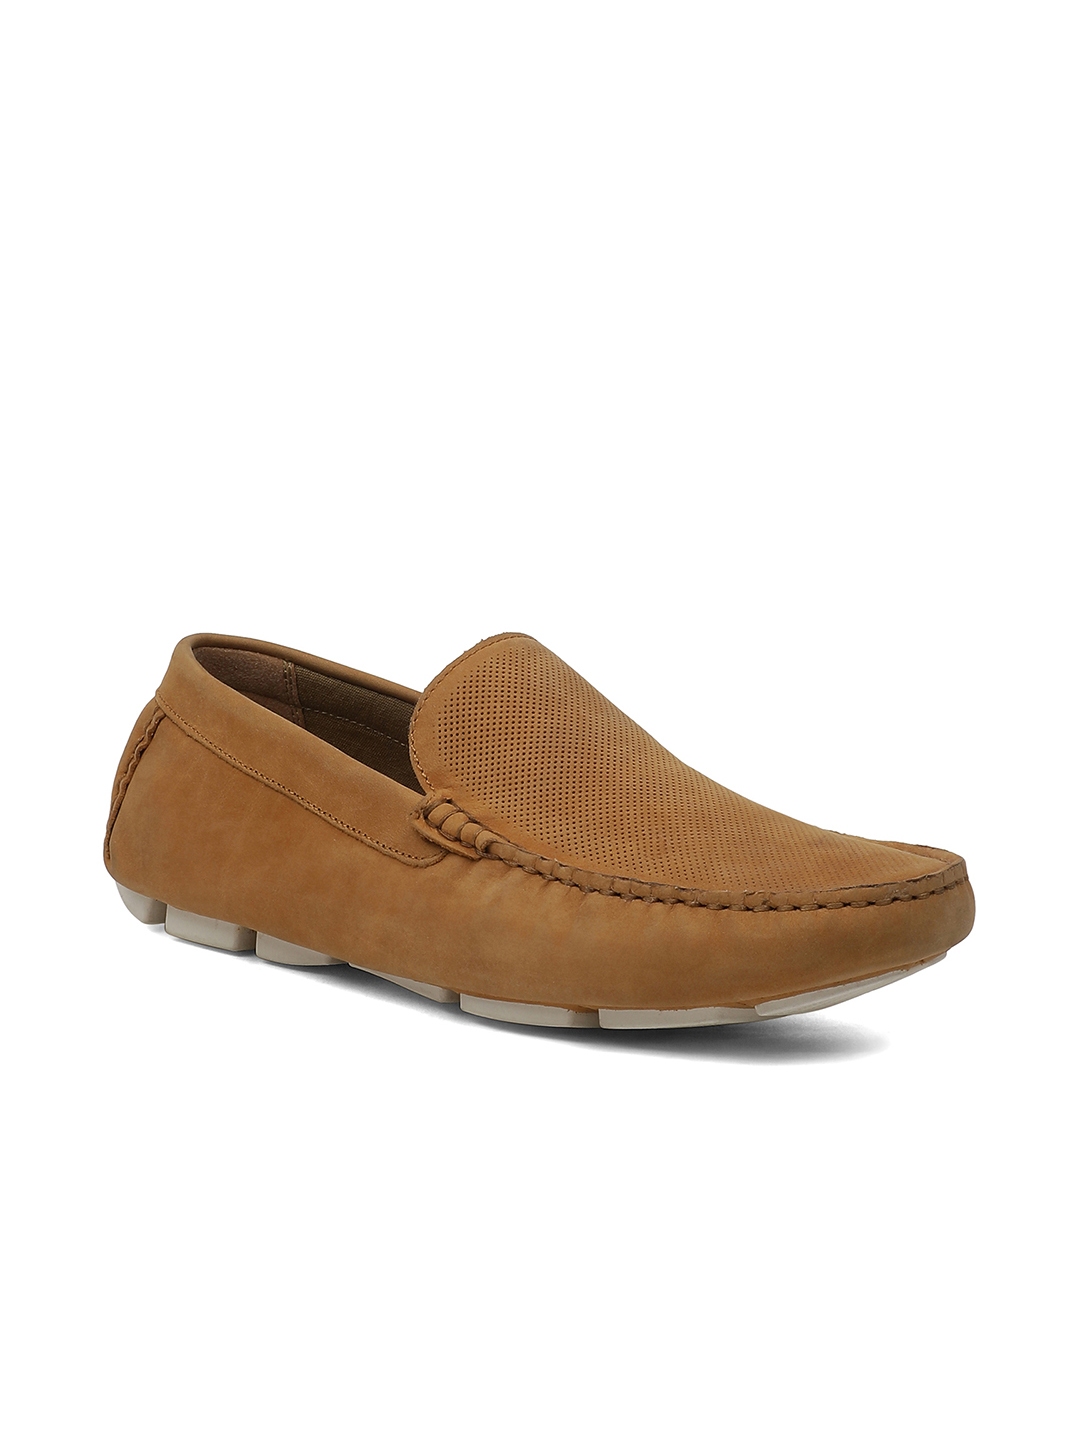 Buy ALDO Men Brown Leather Loafers - Casual Shoes for Men 1749241 | Myntra